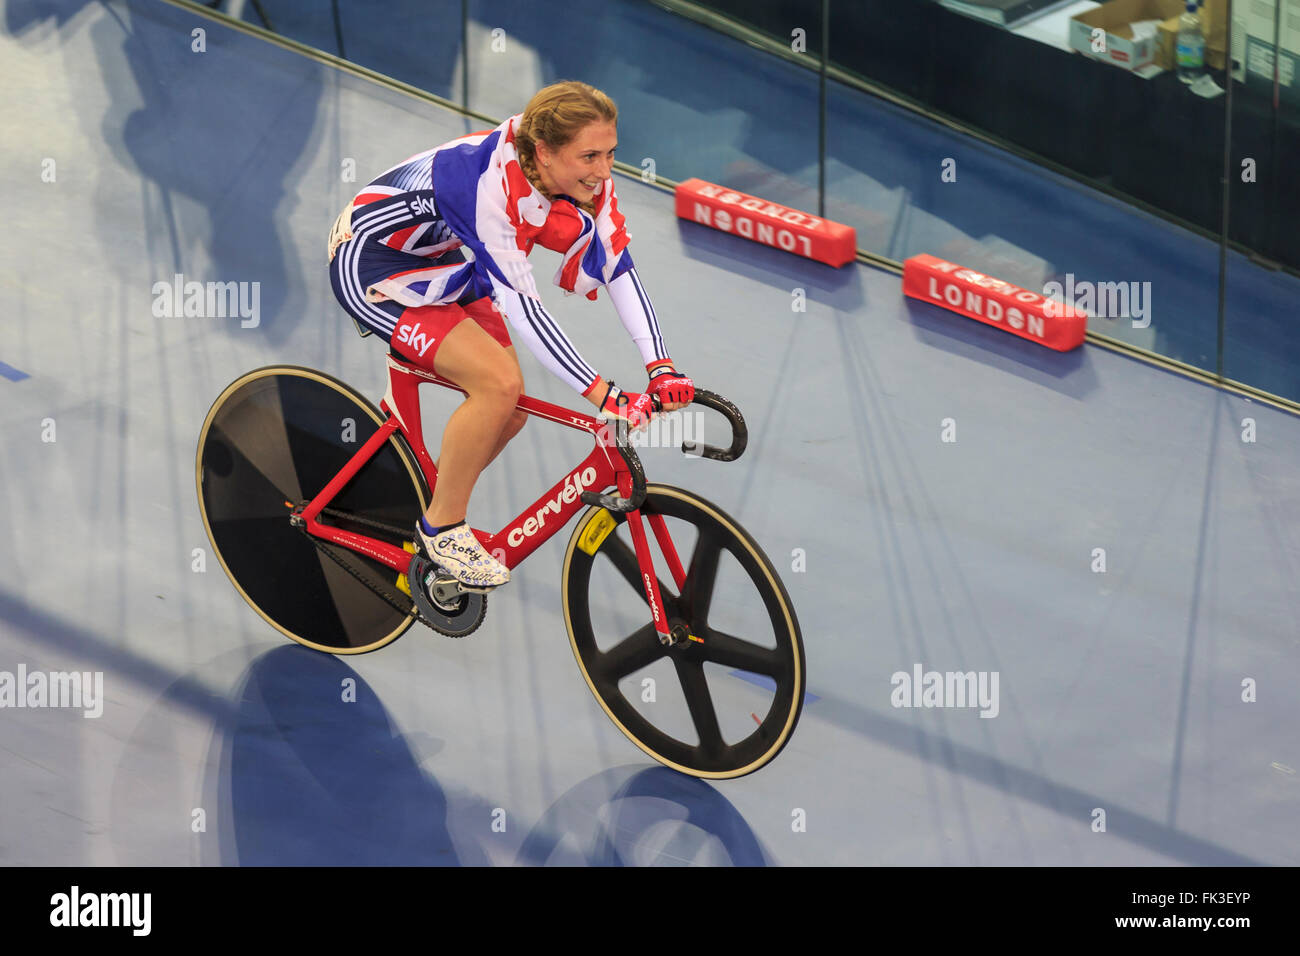 London, UK, 6 March 2016. UCI 2016 Track Cycling World Championships. Great Britain's Laura Kenny (Laura Trott), with a Union Flag draped around her, celebrates after winning the Women's Omnium. Credit:  Clive Jones/Alamy Live News Stock Photo